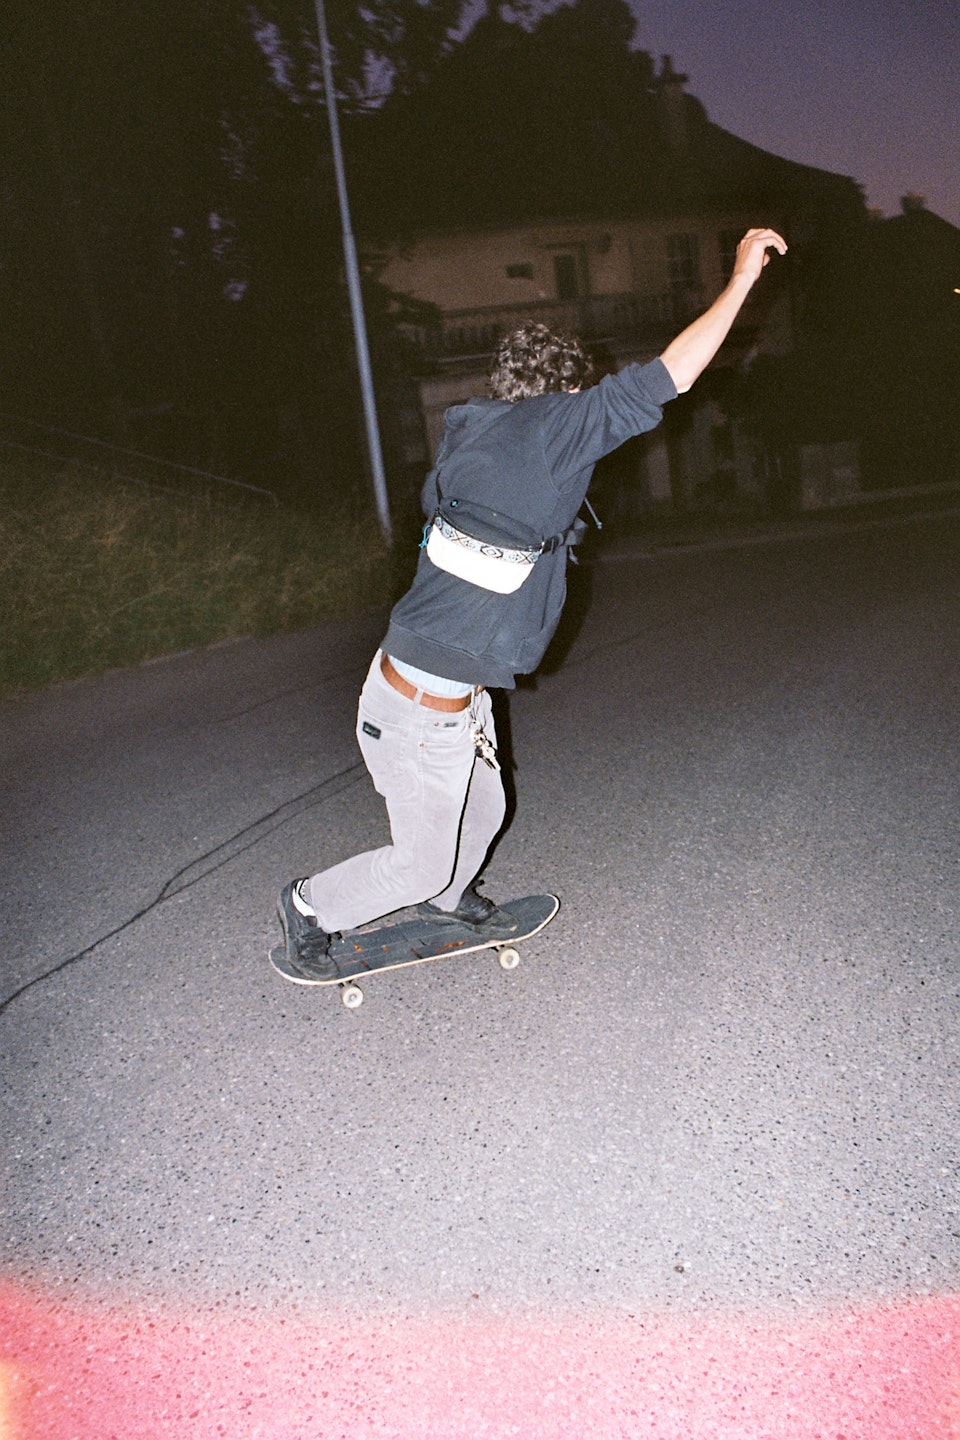 FabioStecher_Hillbomb_Speediskey_2020_RigiblickZH - WHATS THE STORY BEHIND IT:

It was a normal hot summer night in Zurich, we were hanging out at our local spot called "Rigiblick". We built a fire and skated a few laps down the hill. A friend, actually the skater who is in the photos, brought an analog photo camera. We joked about what we could do with the camera. Then it occurred to me, how about doing a followcam with an analog camera.

So that's what we did, and this is the result. RAW. UNEDITED. REAL LIFE SKATEBOARDING.